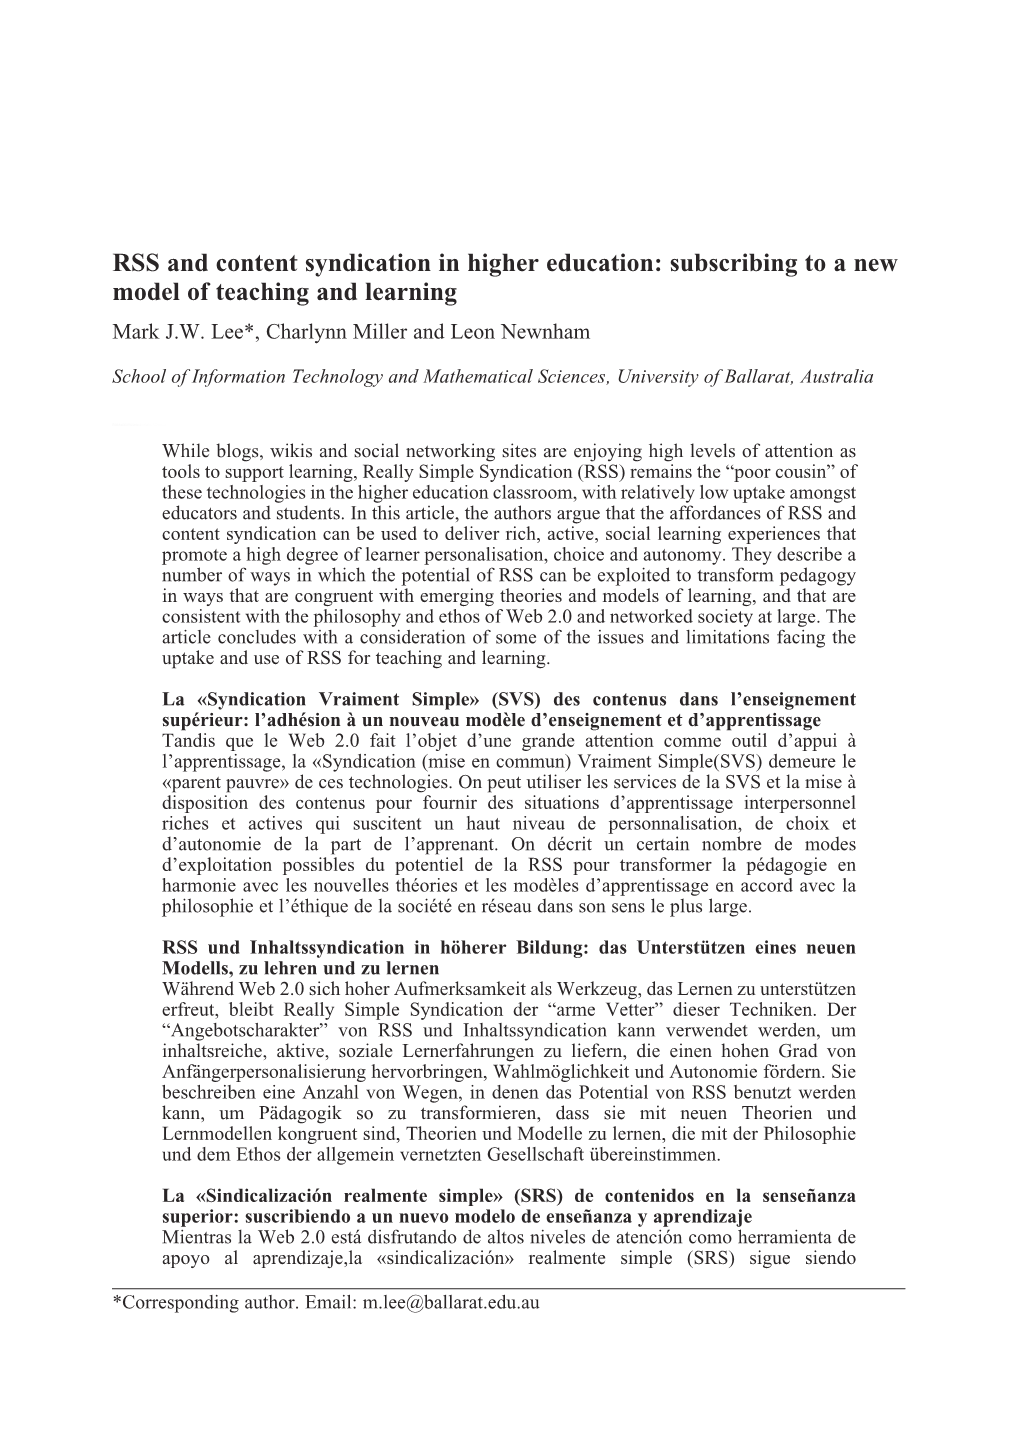 RSS and Content Syndication in Higher Education: Subscribing to a New Model of Teaching and Learning Mark J.W